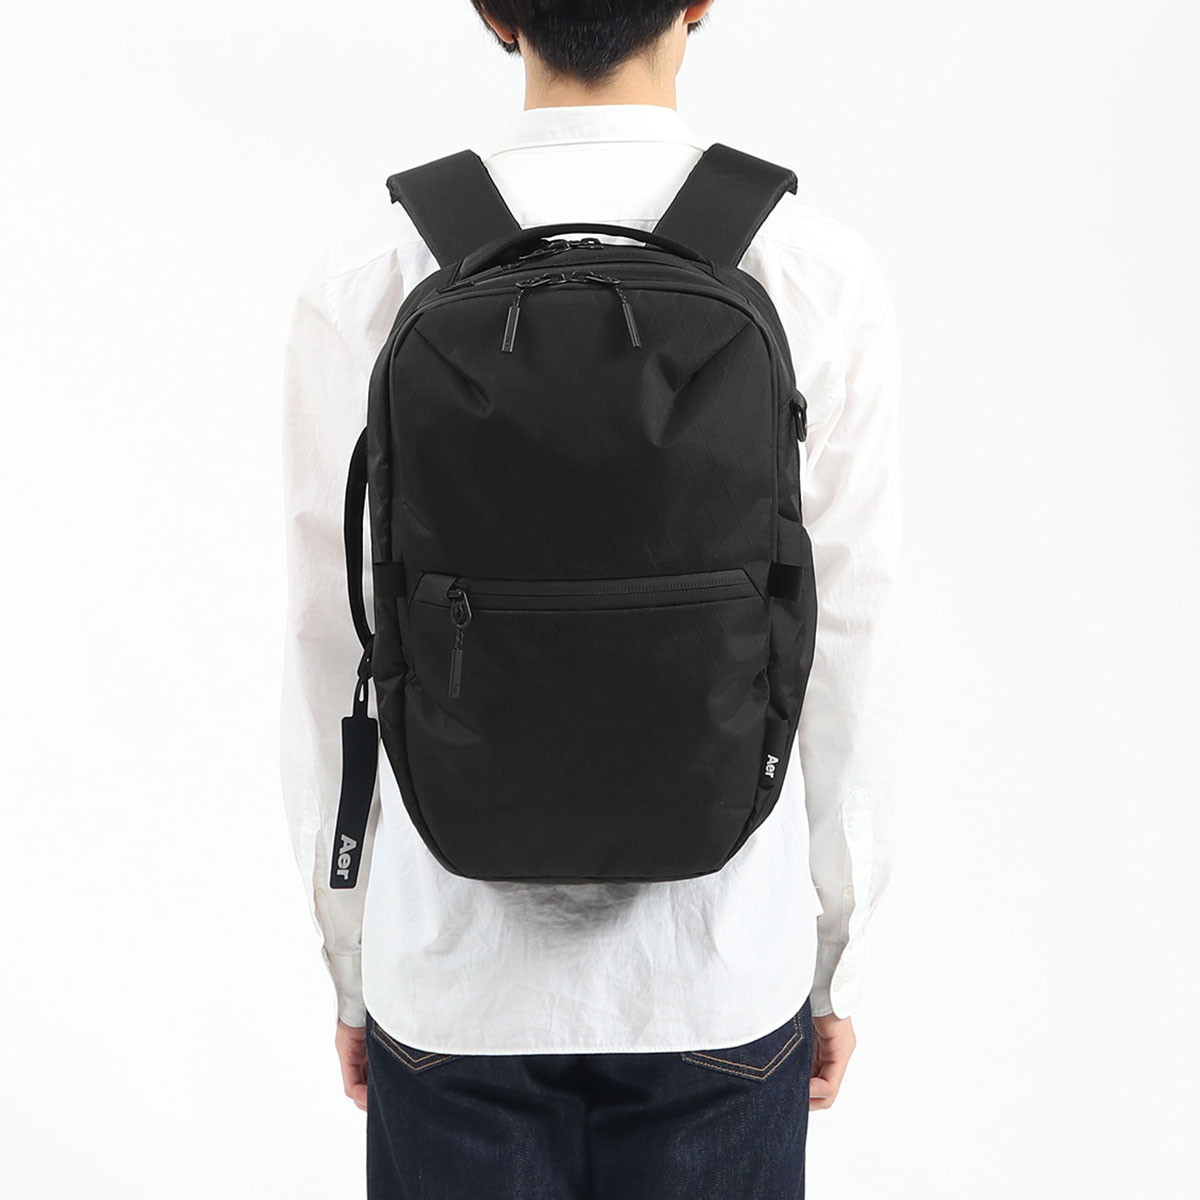 Aer エアー City Collection City Pack X-pac バックパック 14L